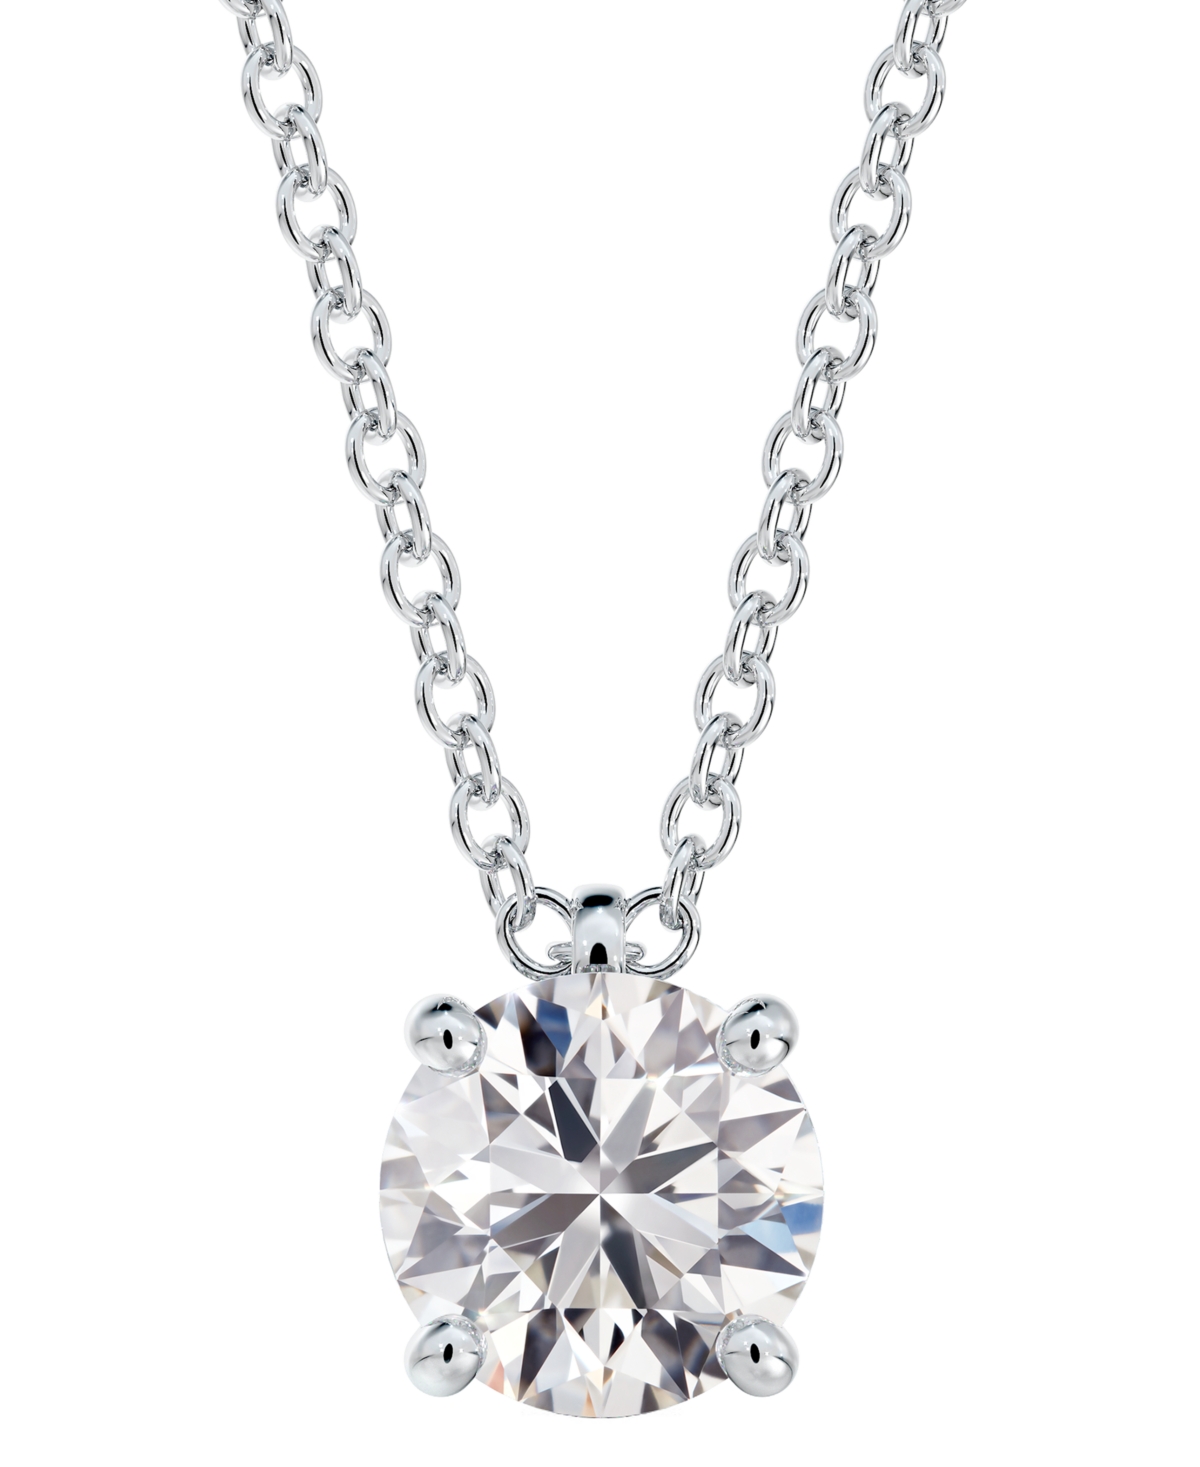 Portfolio by De Beers Forevermark Diamond Solitaire Pendant Necklace (5/8 ct. t.w.) in 14k White Gold, 16" + 2" extender - White Gold